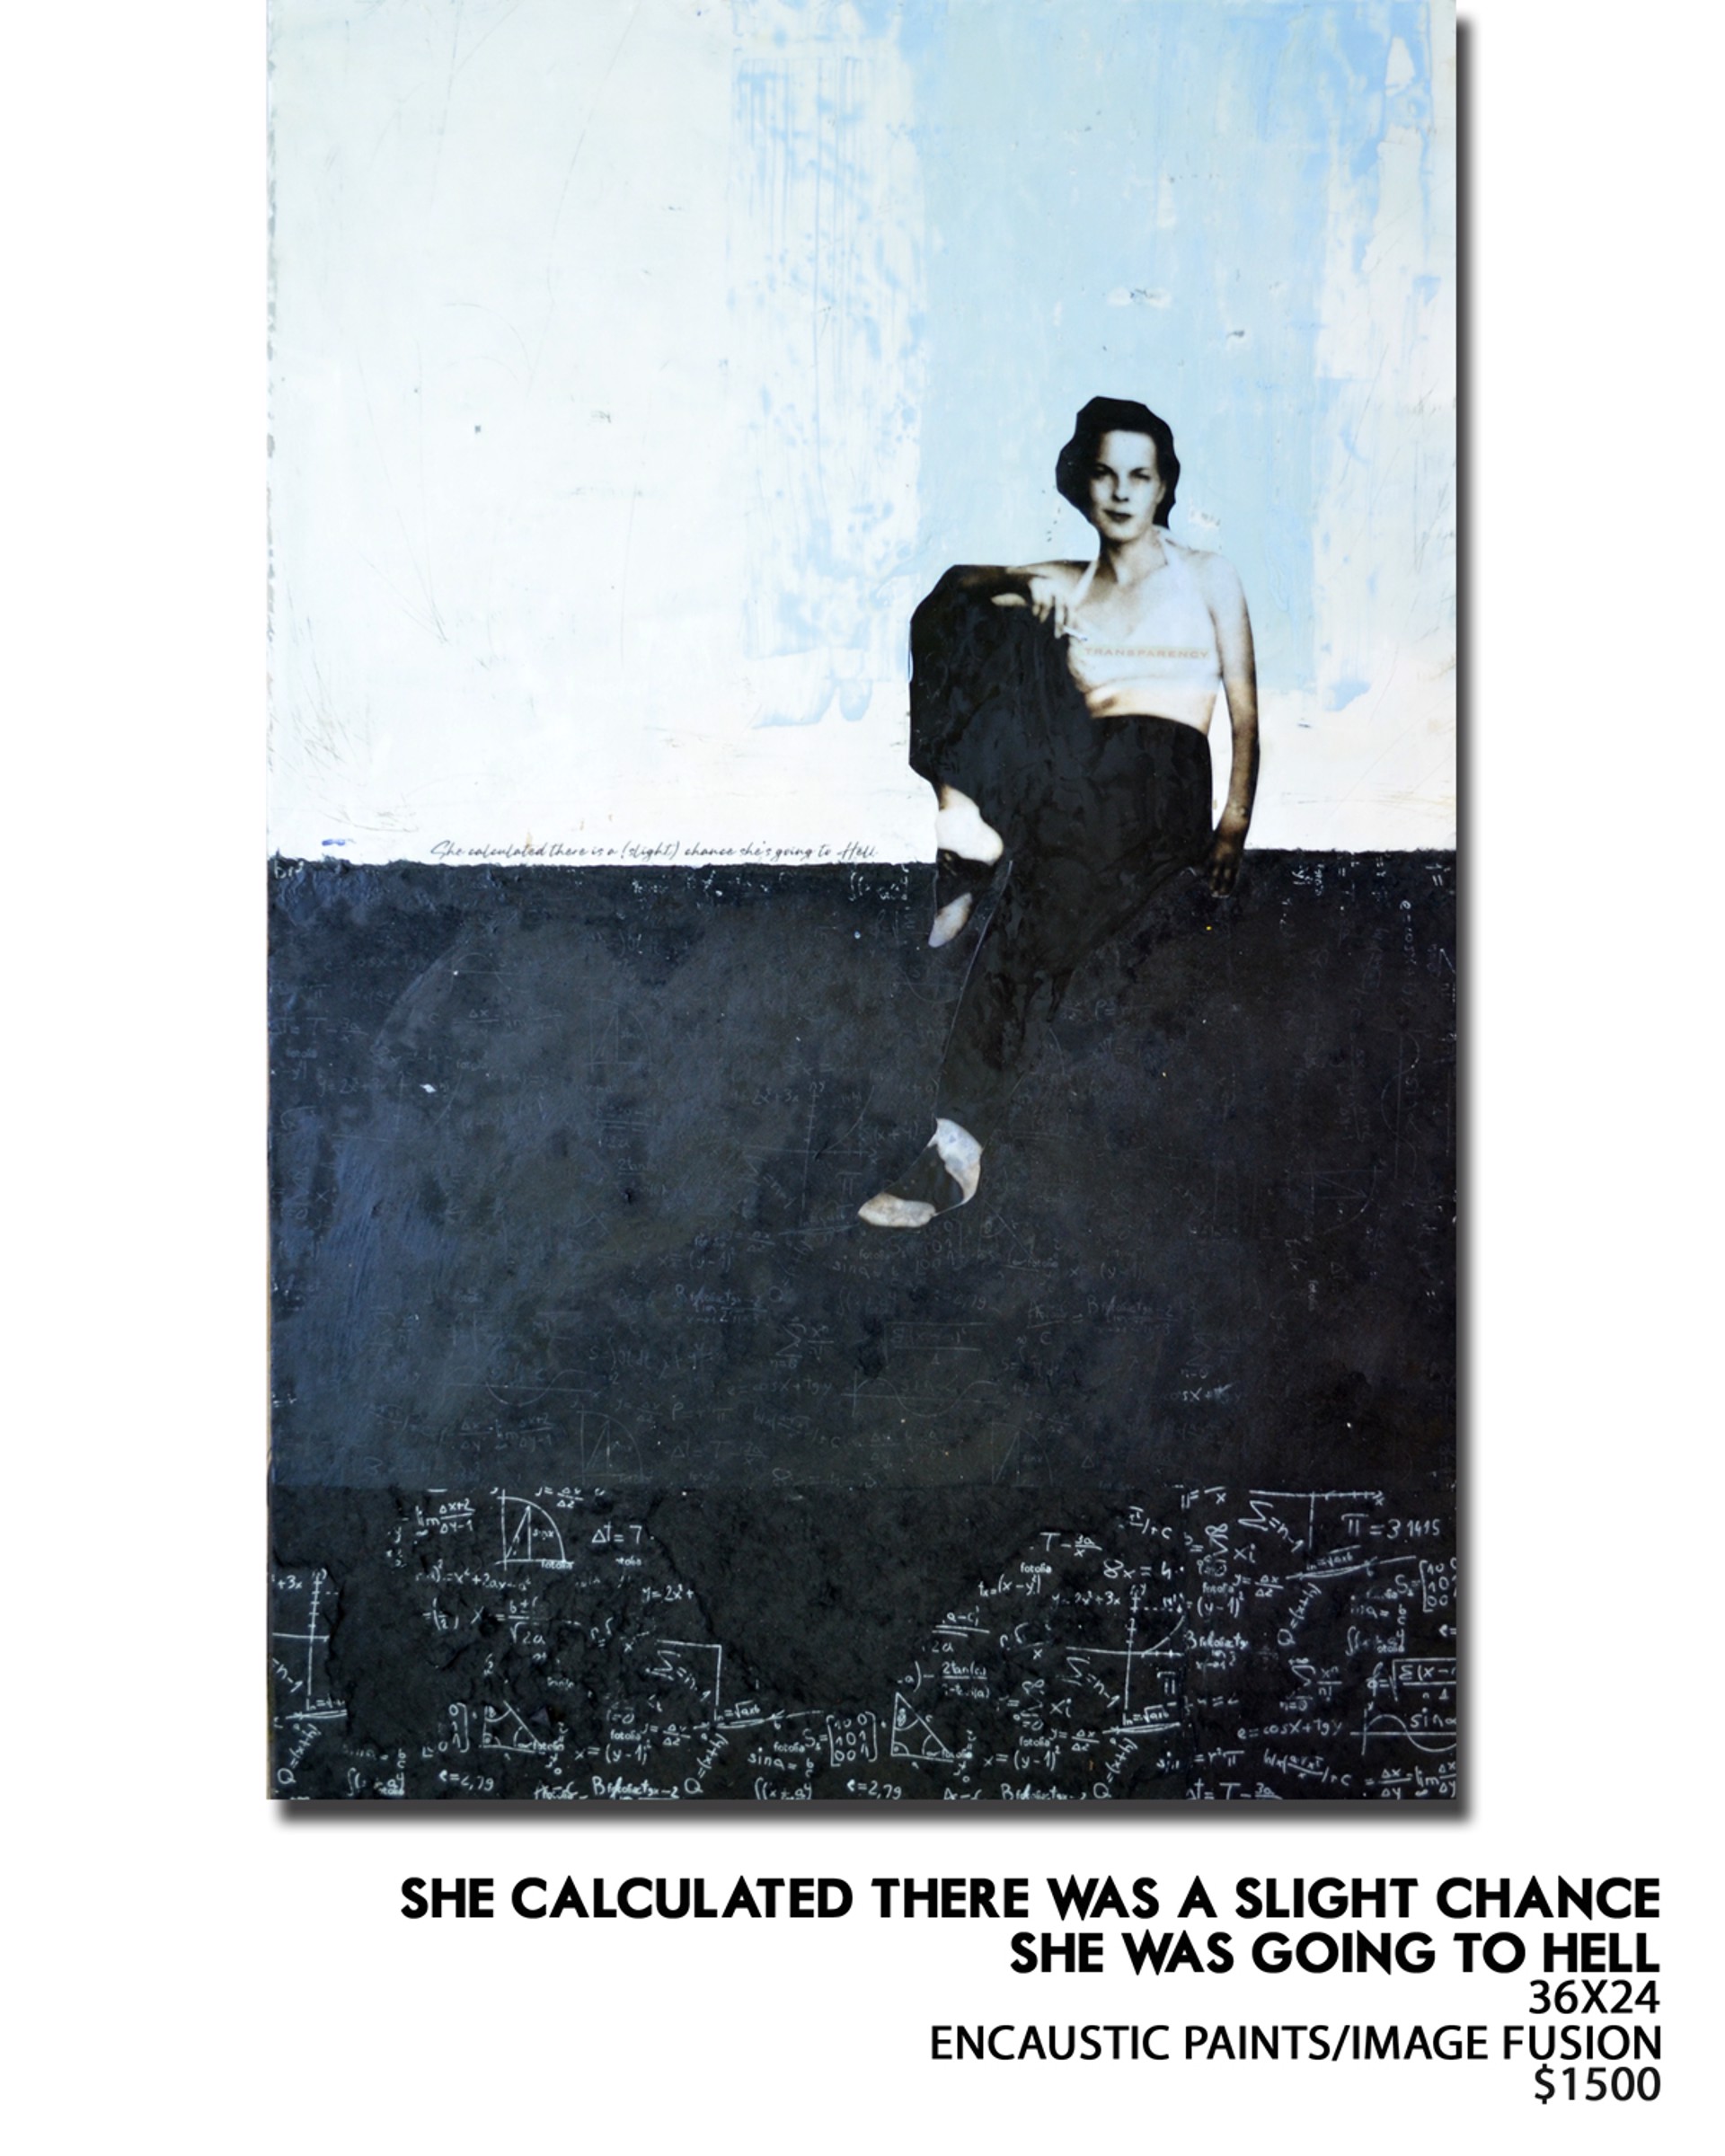 She Calculated There Is A Slight Chance She's Going To Hell by Ruth Crowe